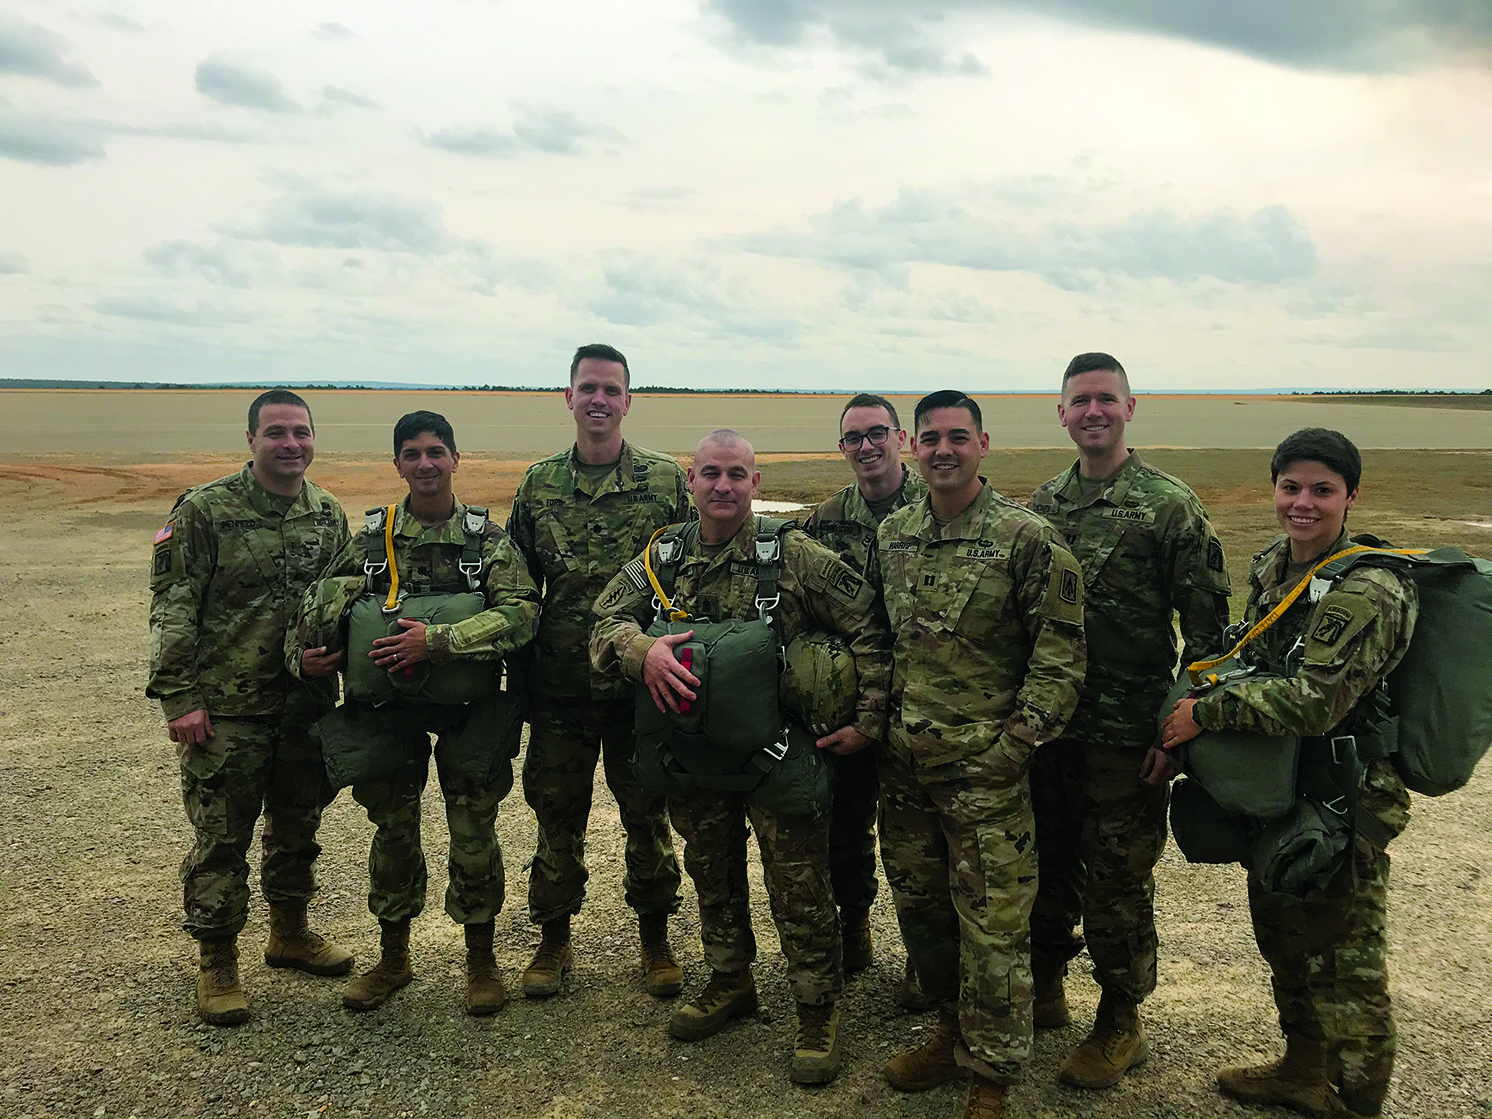 Members of the XVIII Airborne OSJA prepare for a jump. From left to right: CW3 Chris Penfield, LTC Nagy Chelluri, LTC Chris Ford, SGM Anthony Couch, SPC Nicolas Rodriguez, CPT Trevor Harris, CPT Rob Jones, CPT Jacqueline Coplen.